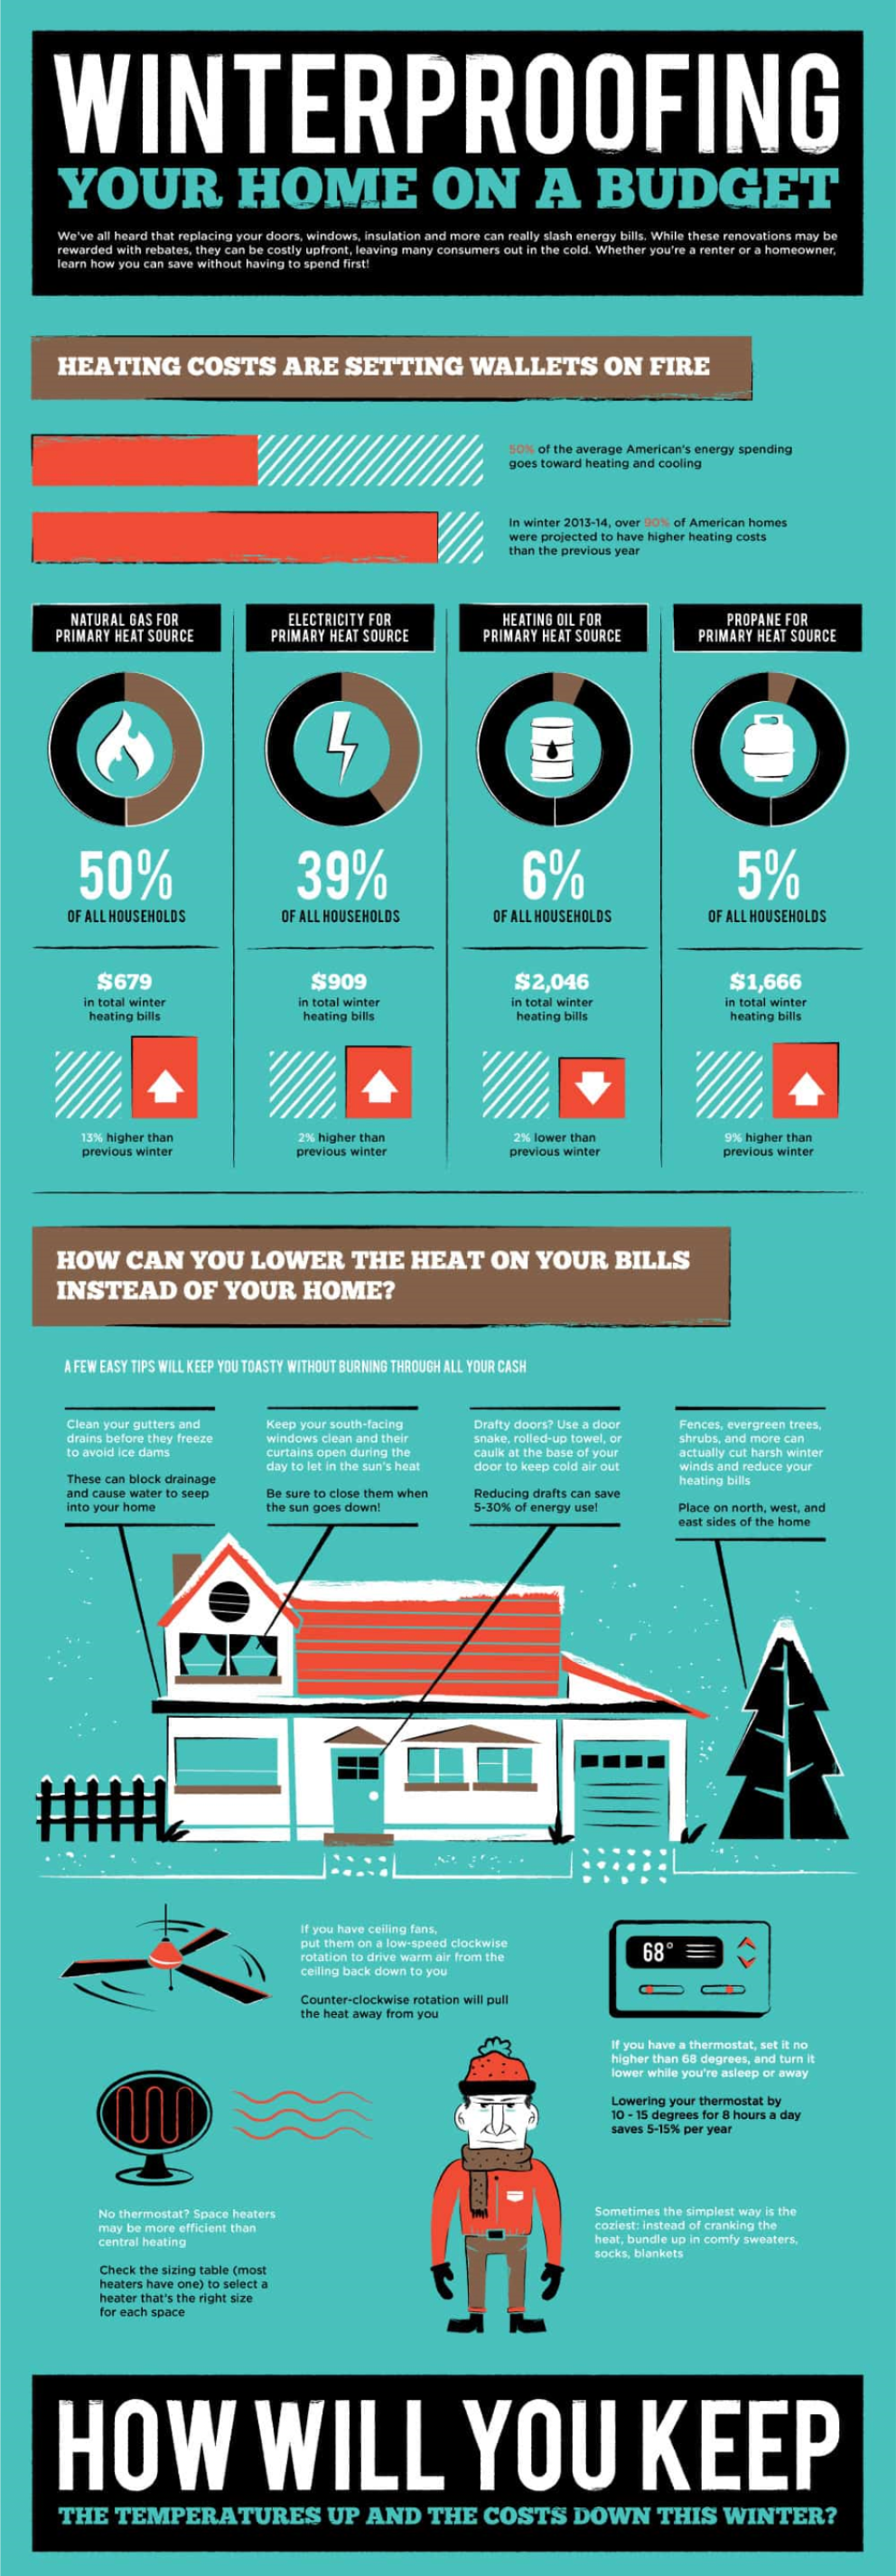 Winter Proofing Your Home - Info Graphic